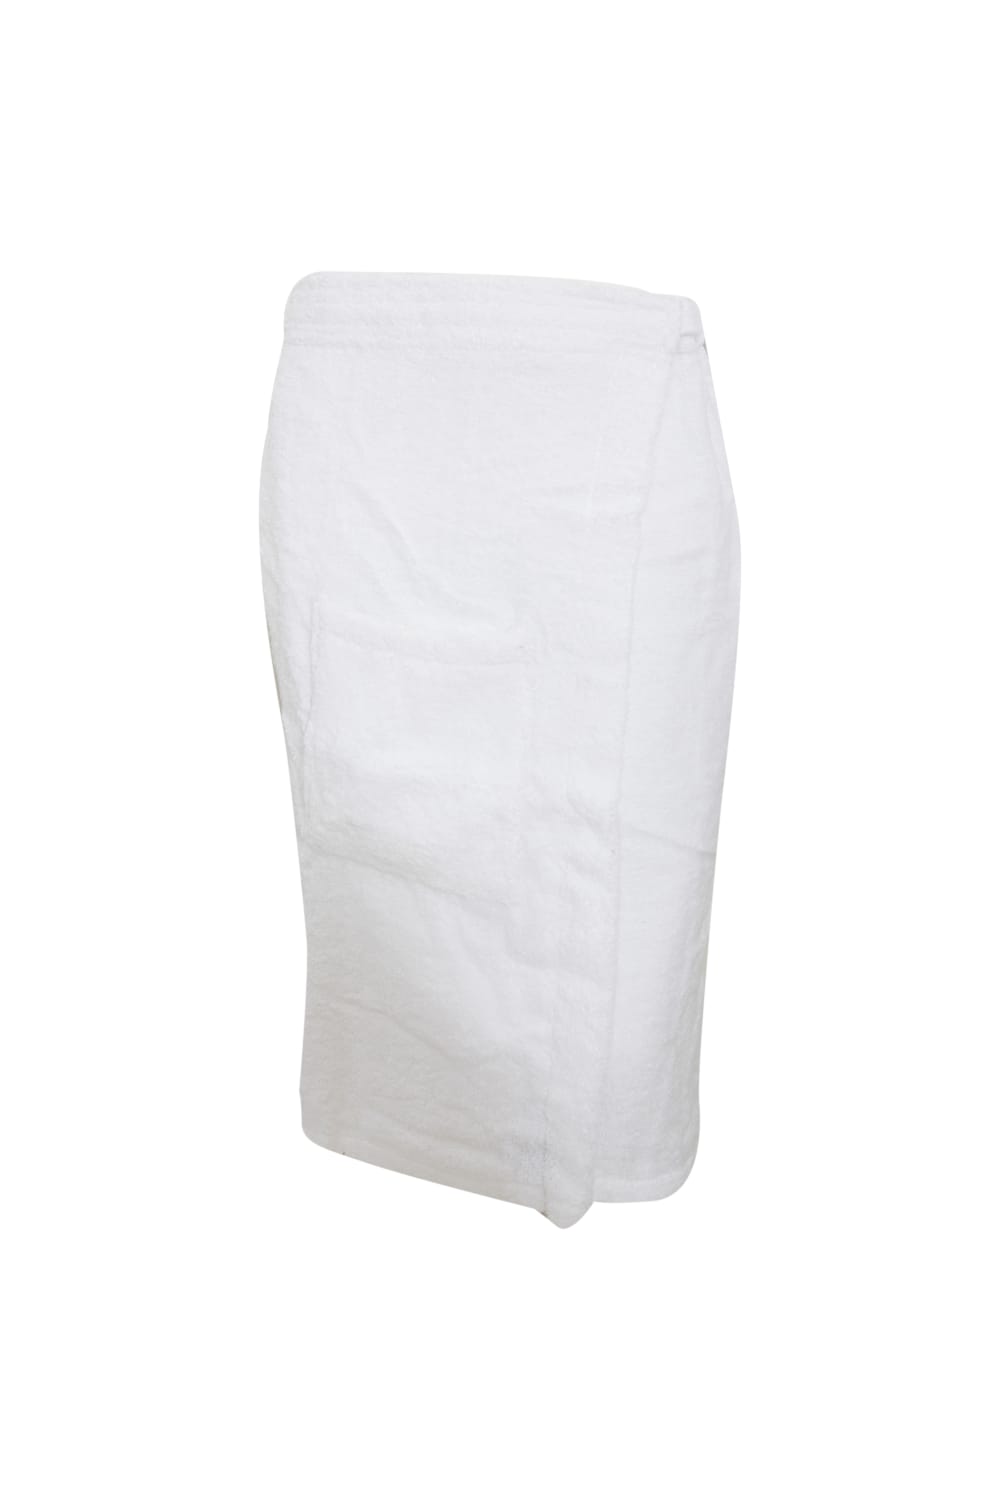 Towels By Jassz Sauna Towel (Pack of 2) (White) (S)